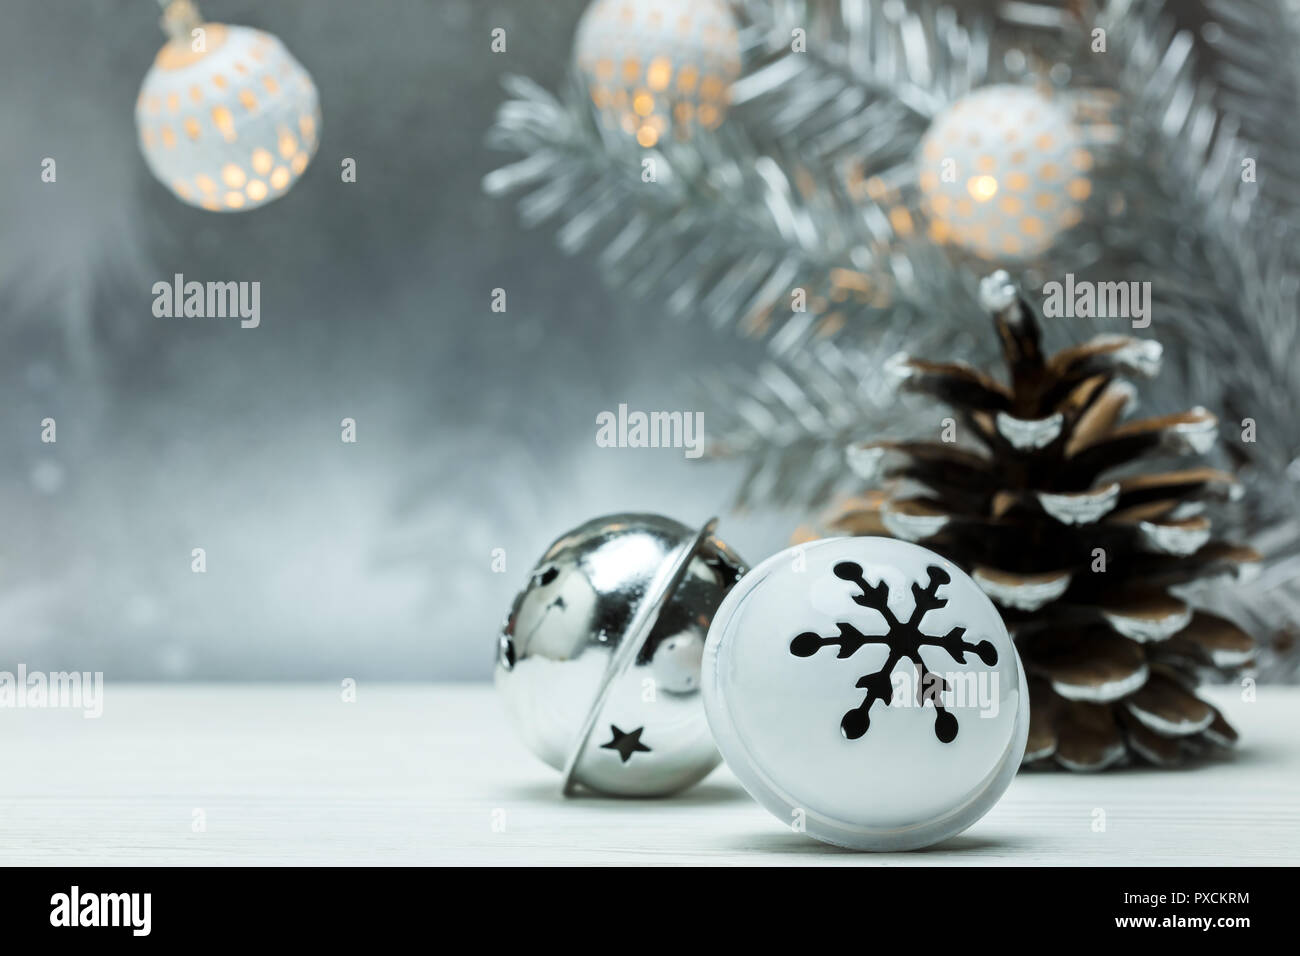 silver pine cone and christmas jingle bells on gray blurred background with fir tree branch and garland lights Stock Photo